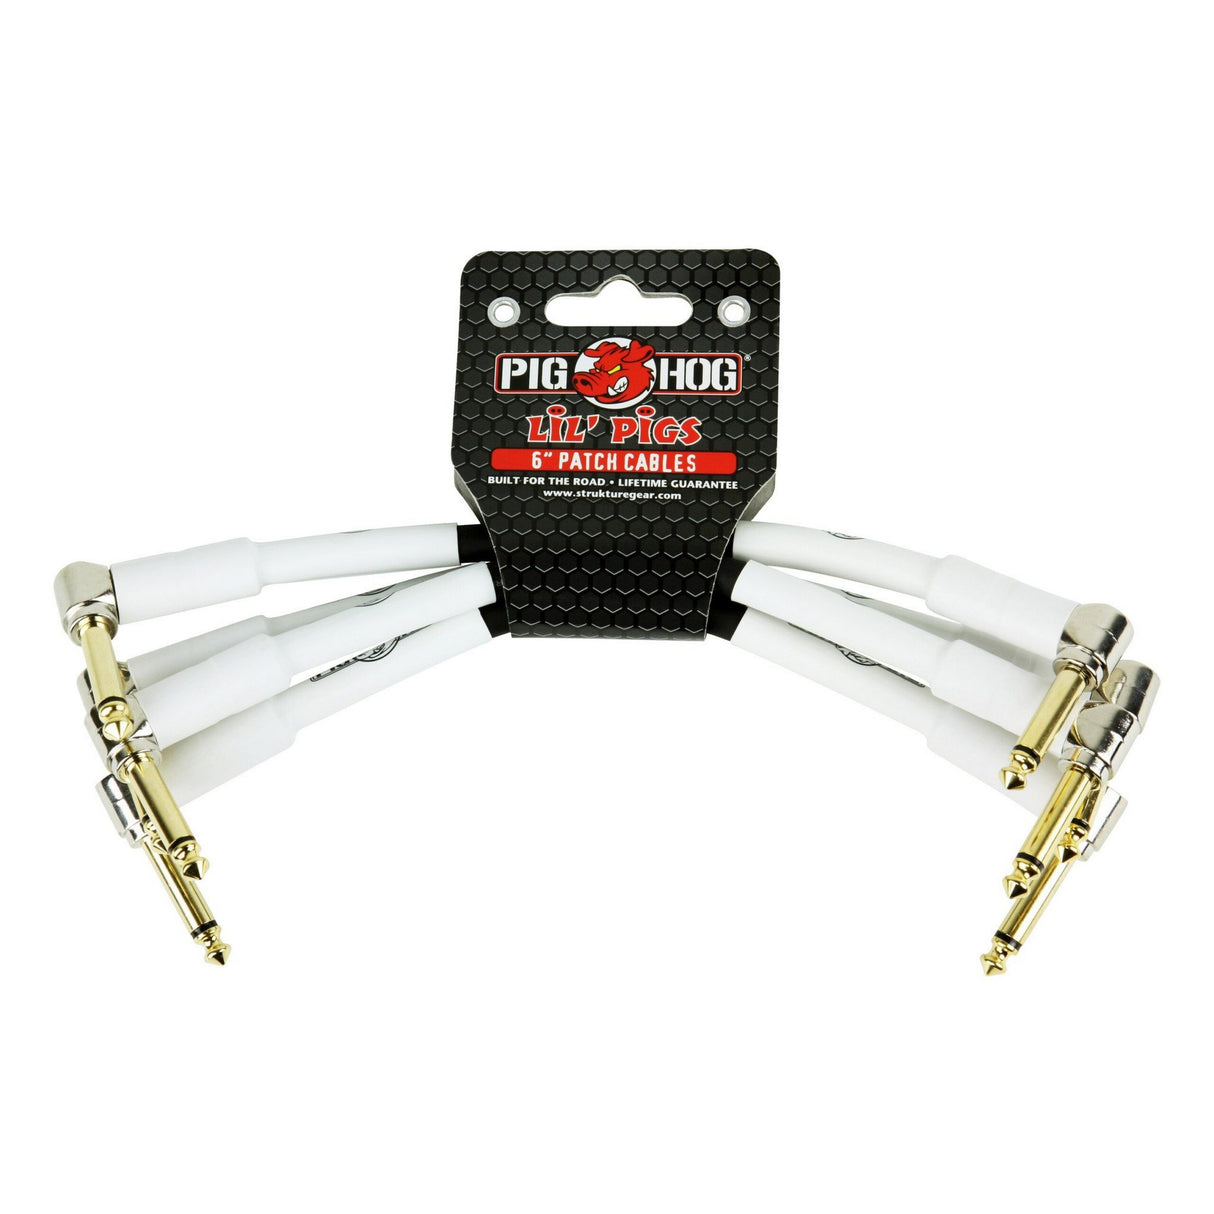 Pig Hog PHLIL6 Lil' Pigs 6-Inch Patch Cables, 4-Pack